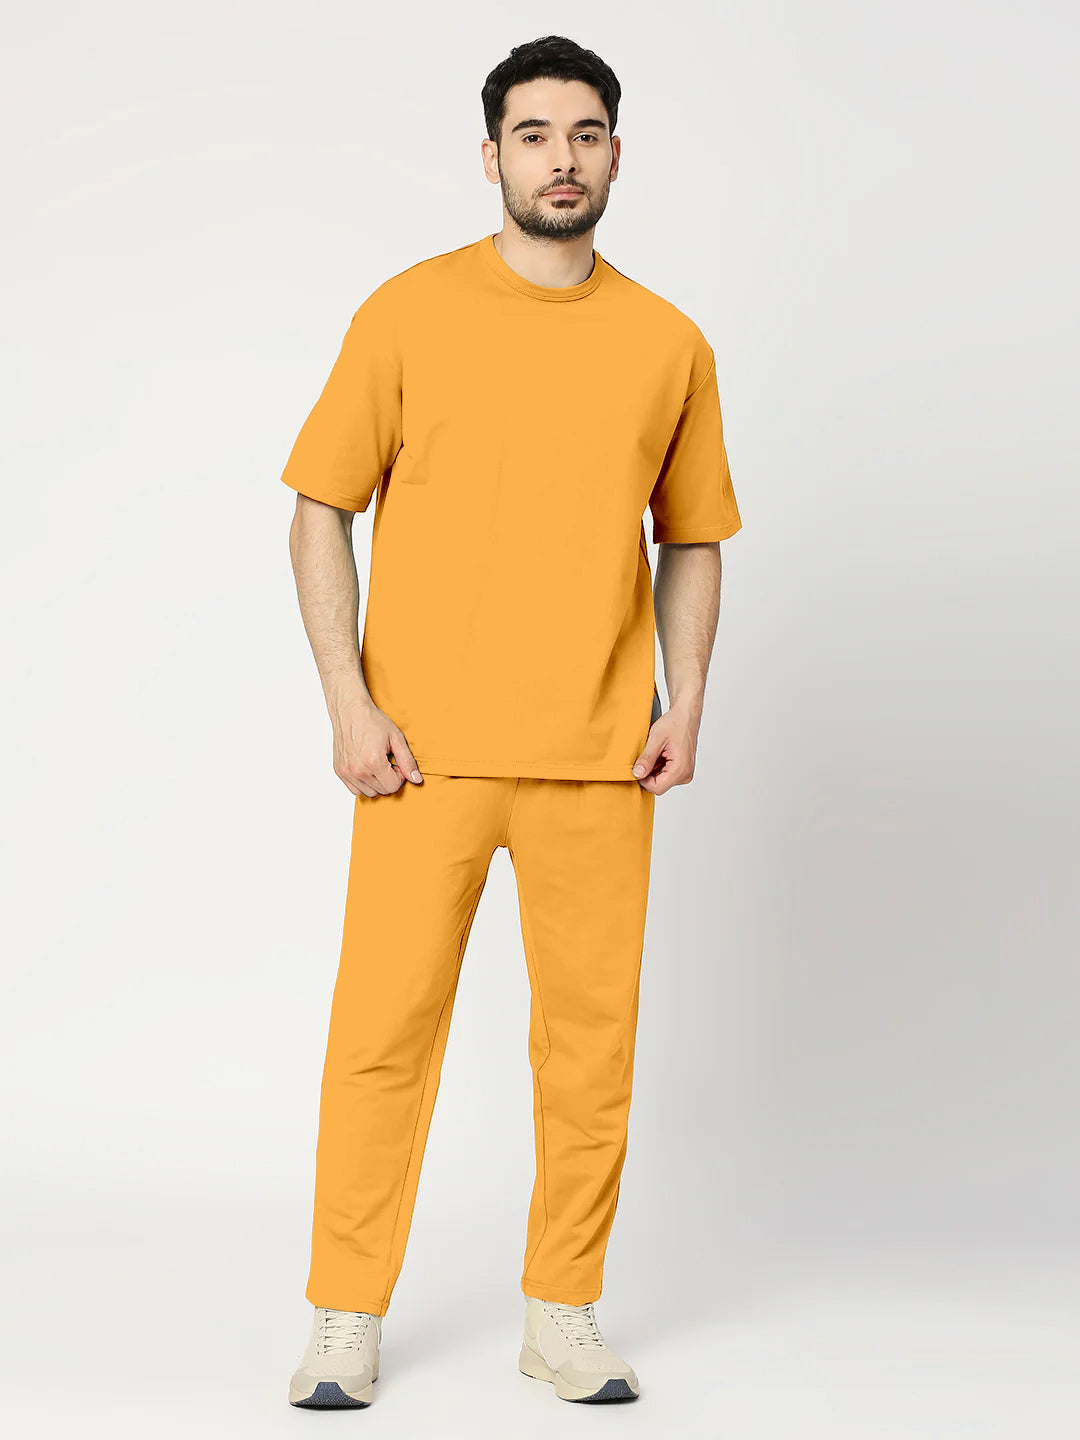 Solid Mustard Round Neck Half Sleeves Tshirt With Pants Co-Ord Set